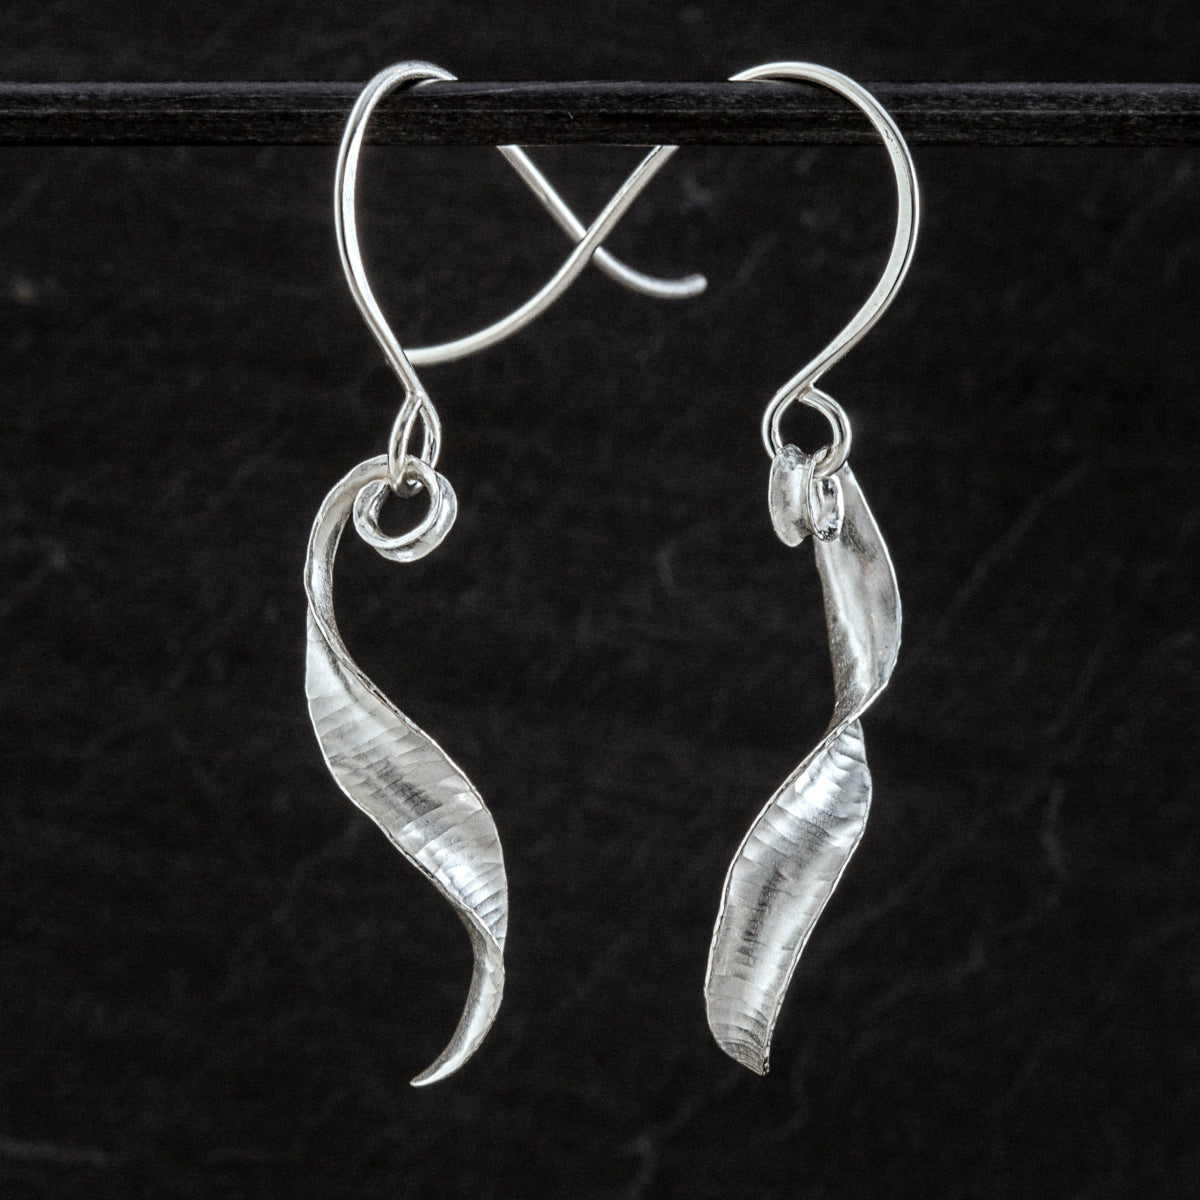 A pair of s-shaped earrings made from recycled sterling silver by the technique of anticlastic raising. The two earrings are mirror images of one another and have a curling, twisting shape. The right hand one is shown from the front and the other from the side.